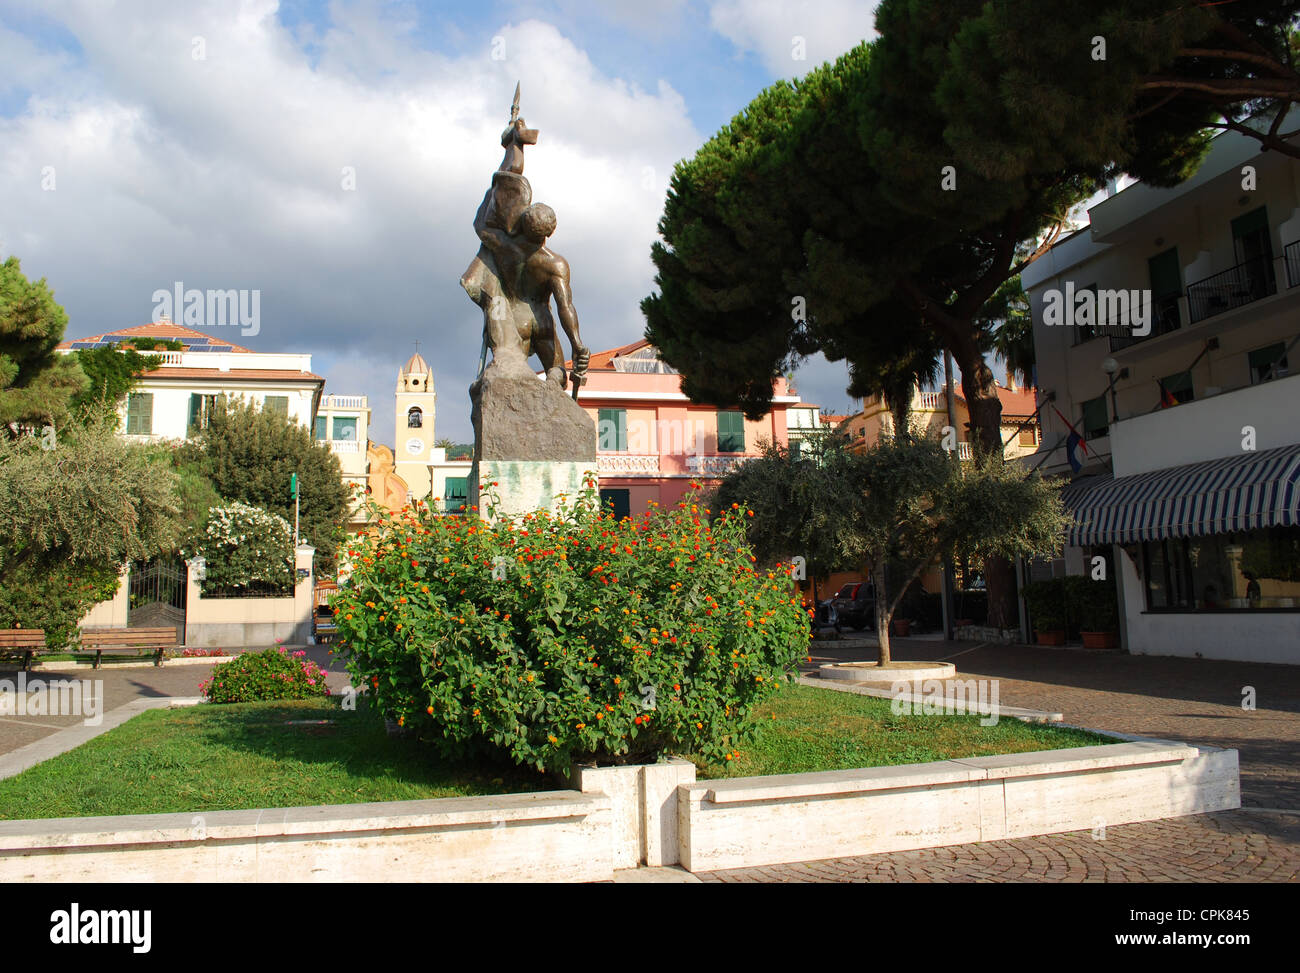 Colorful houses, statue and park, Spotorno, Liguria, Italy Stock Photo